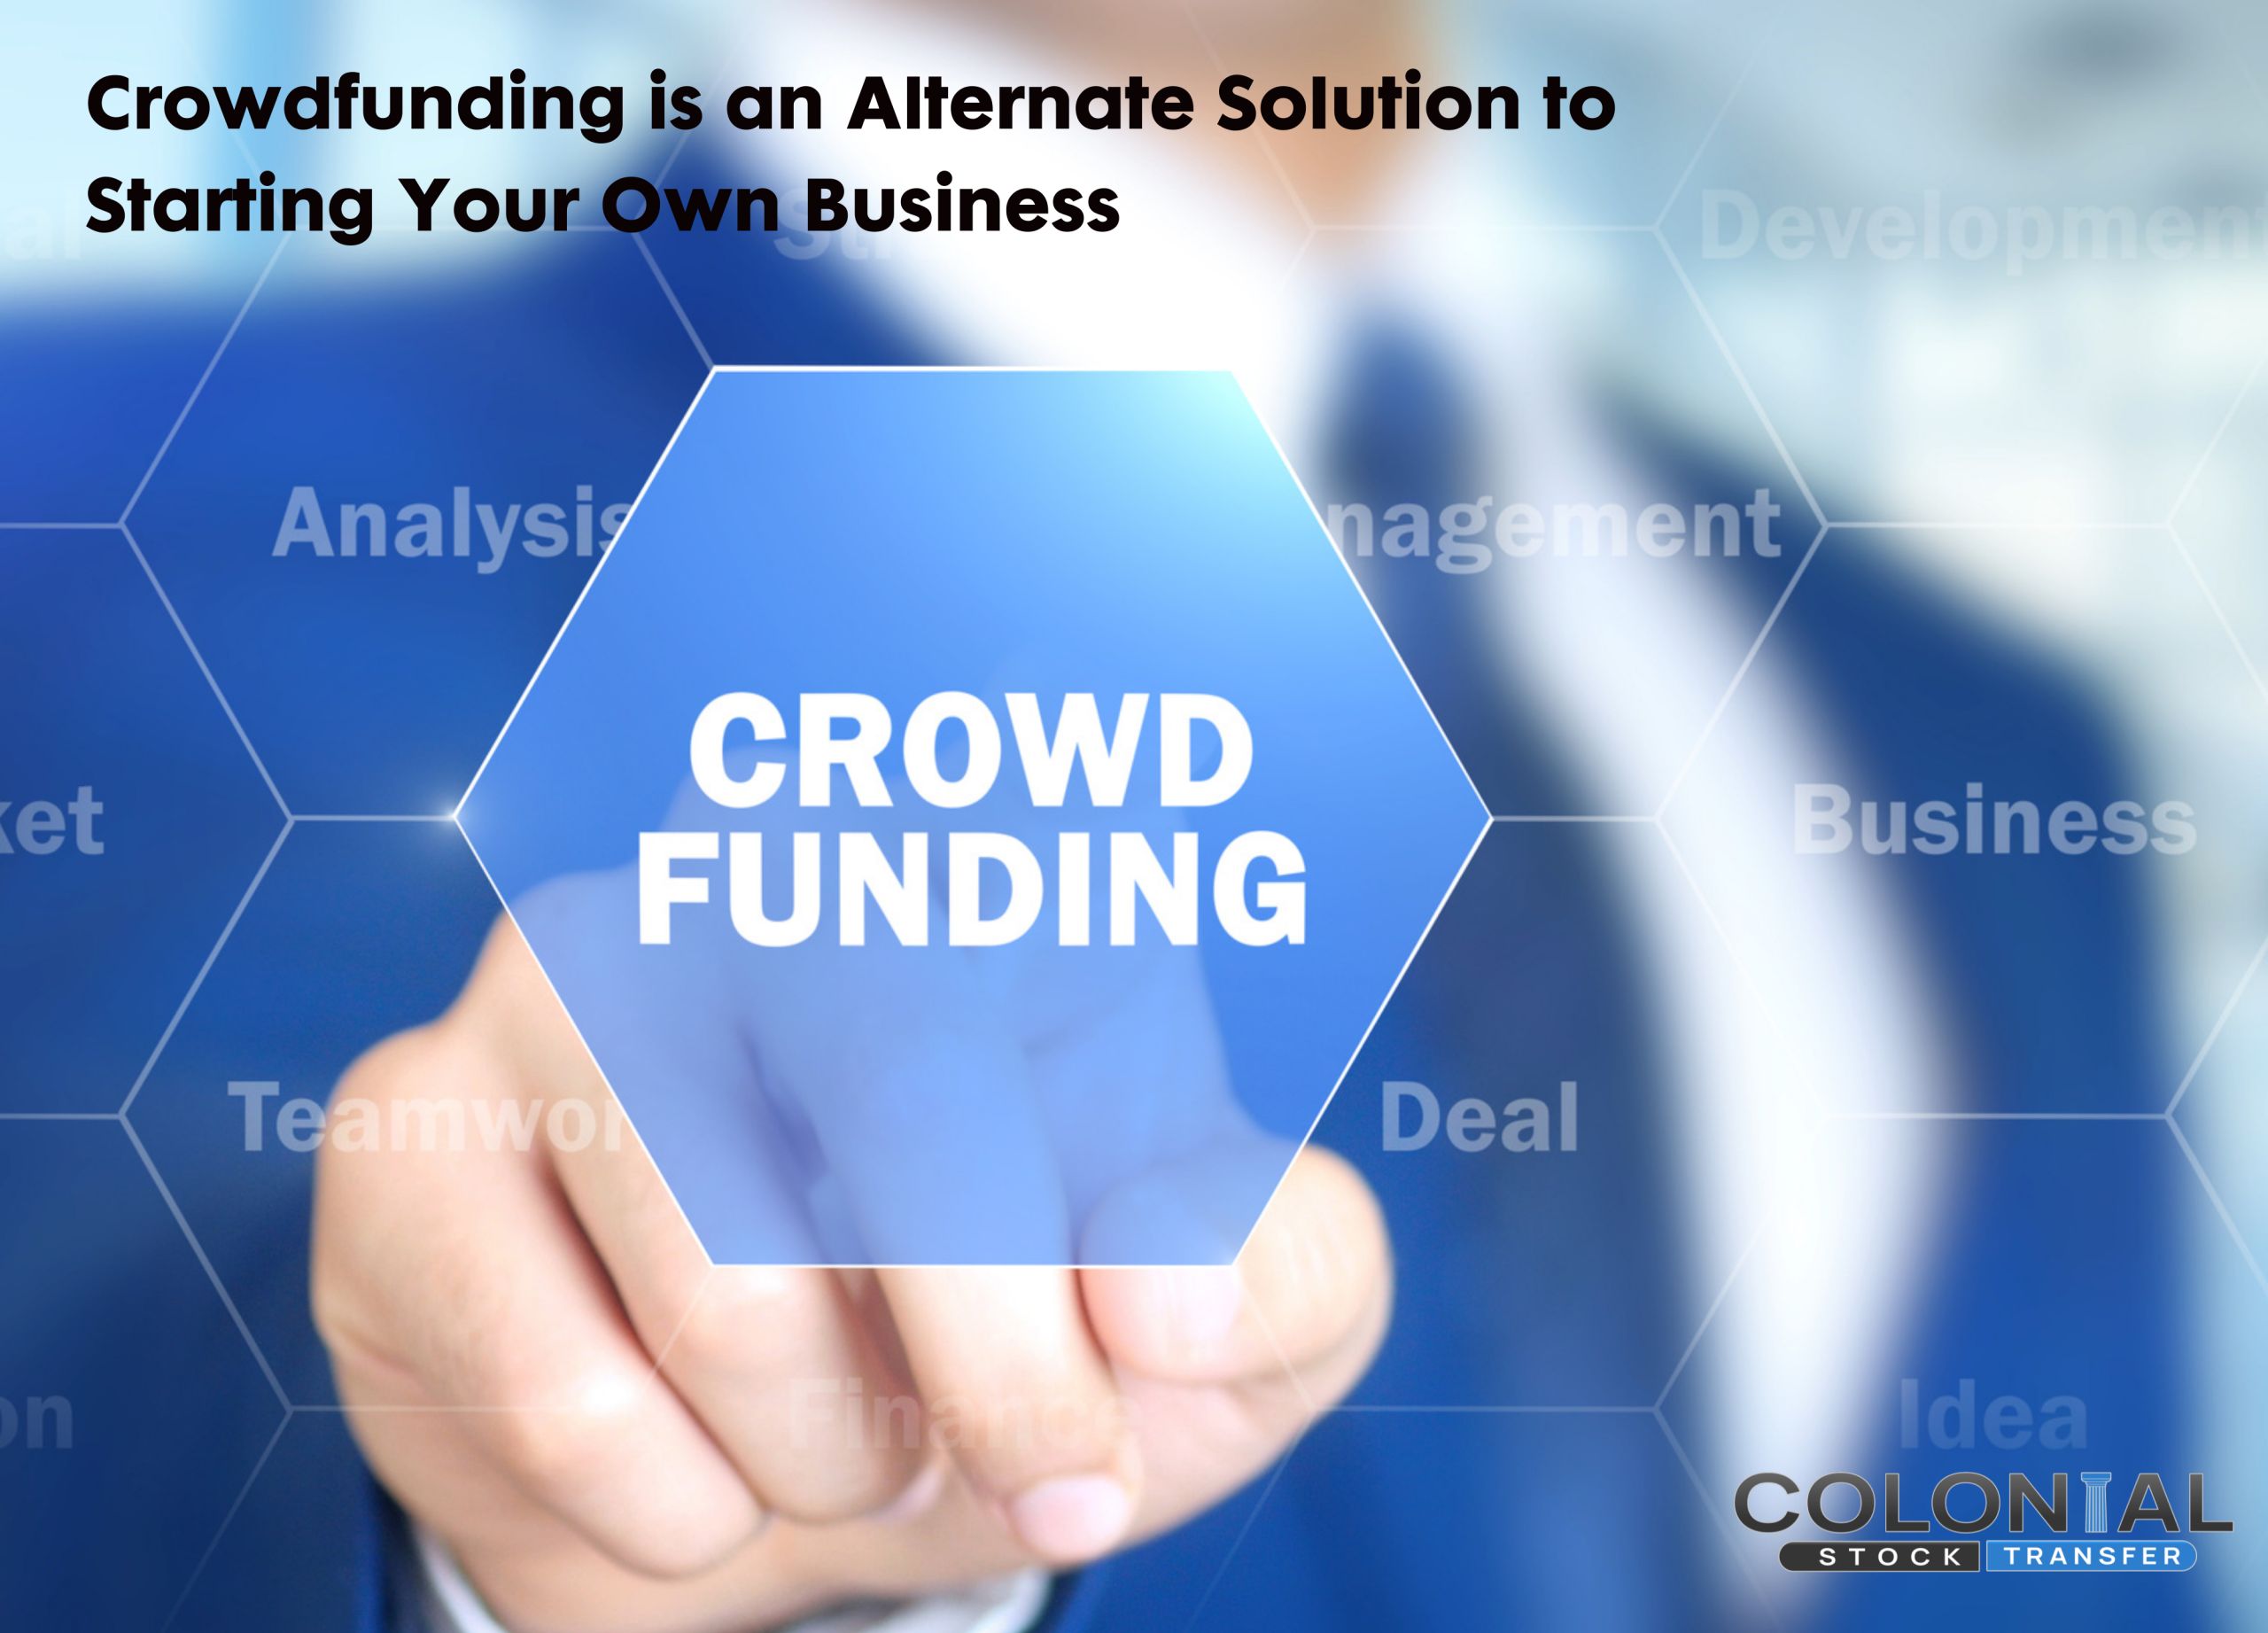 Crowdfunding is an Alternate Solution to Starting Your Own Business